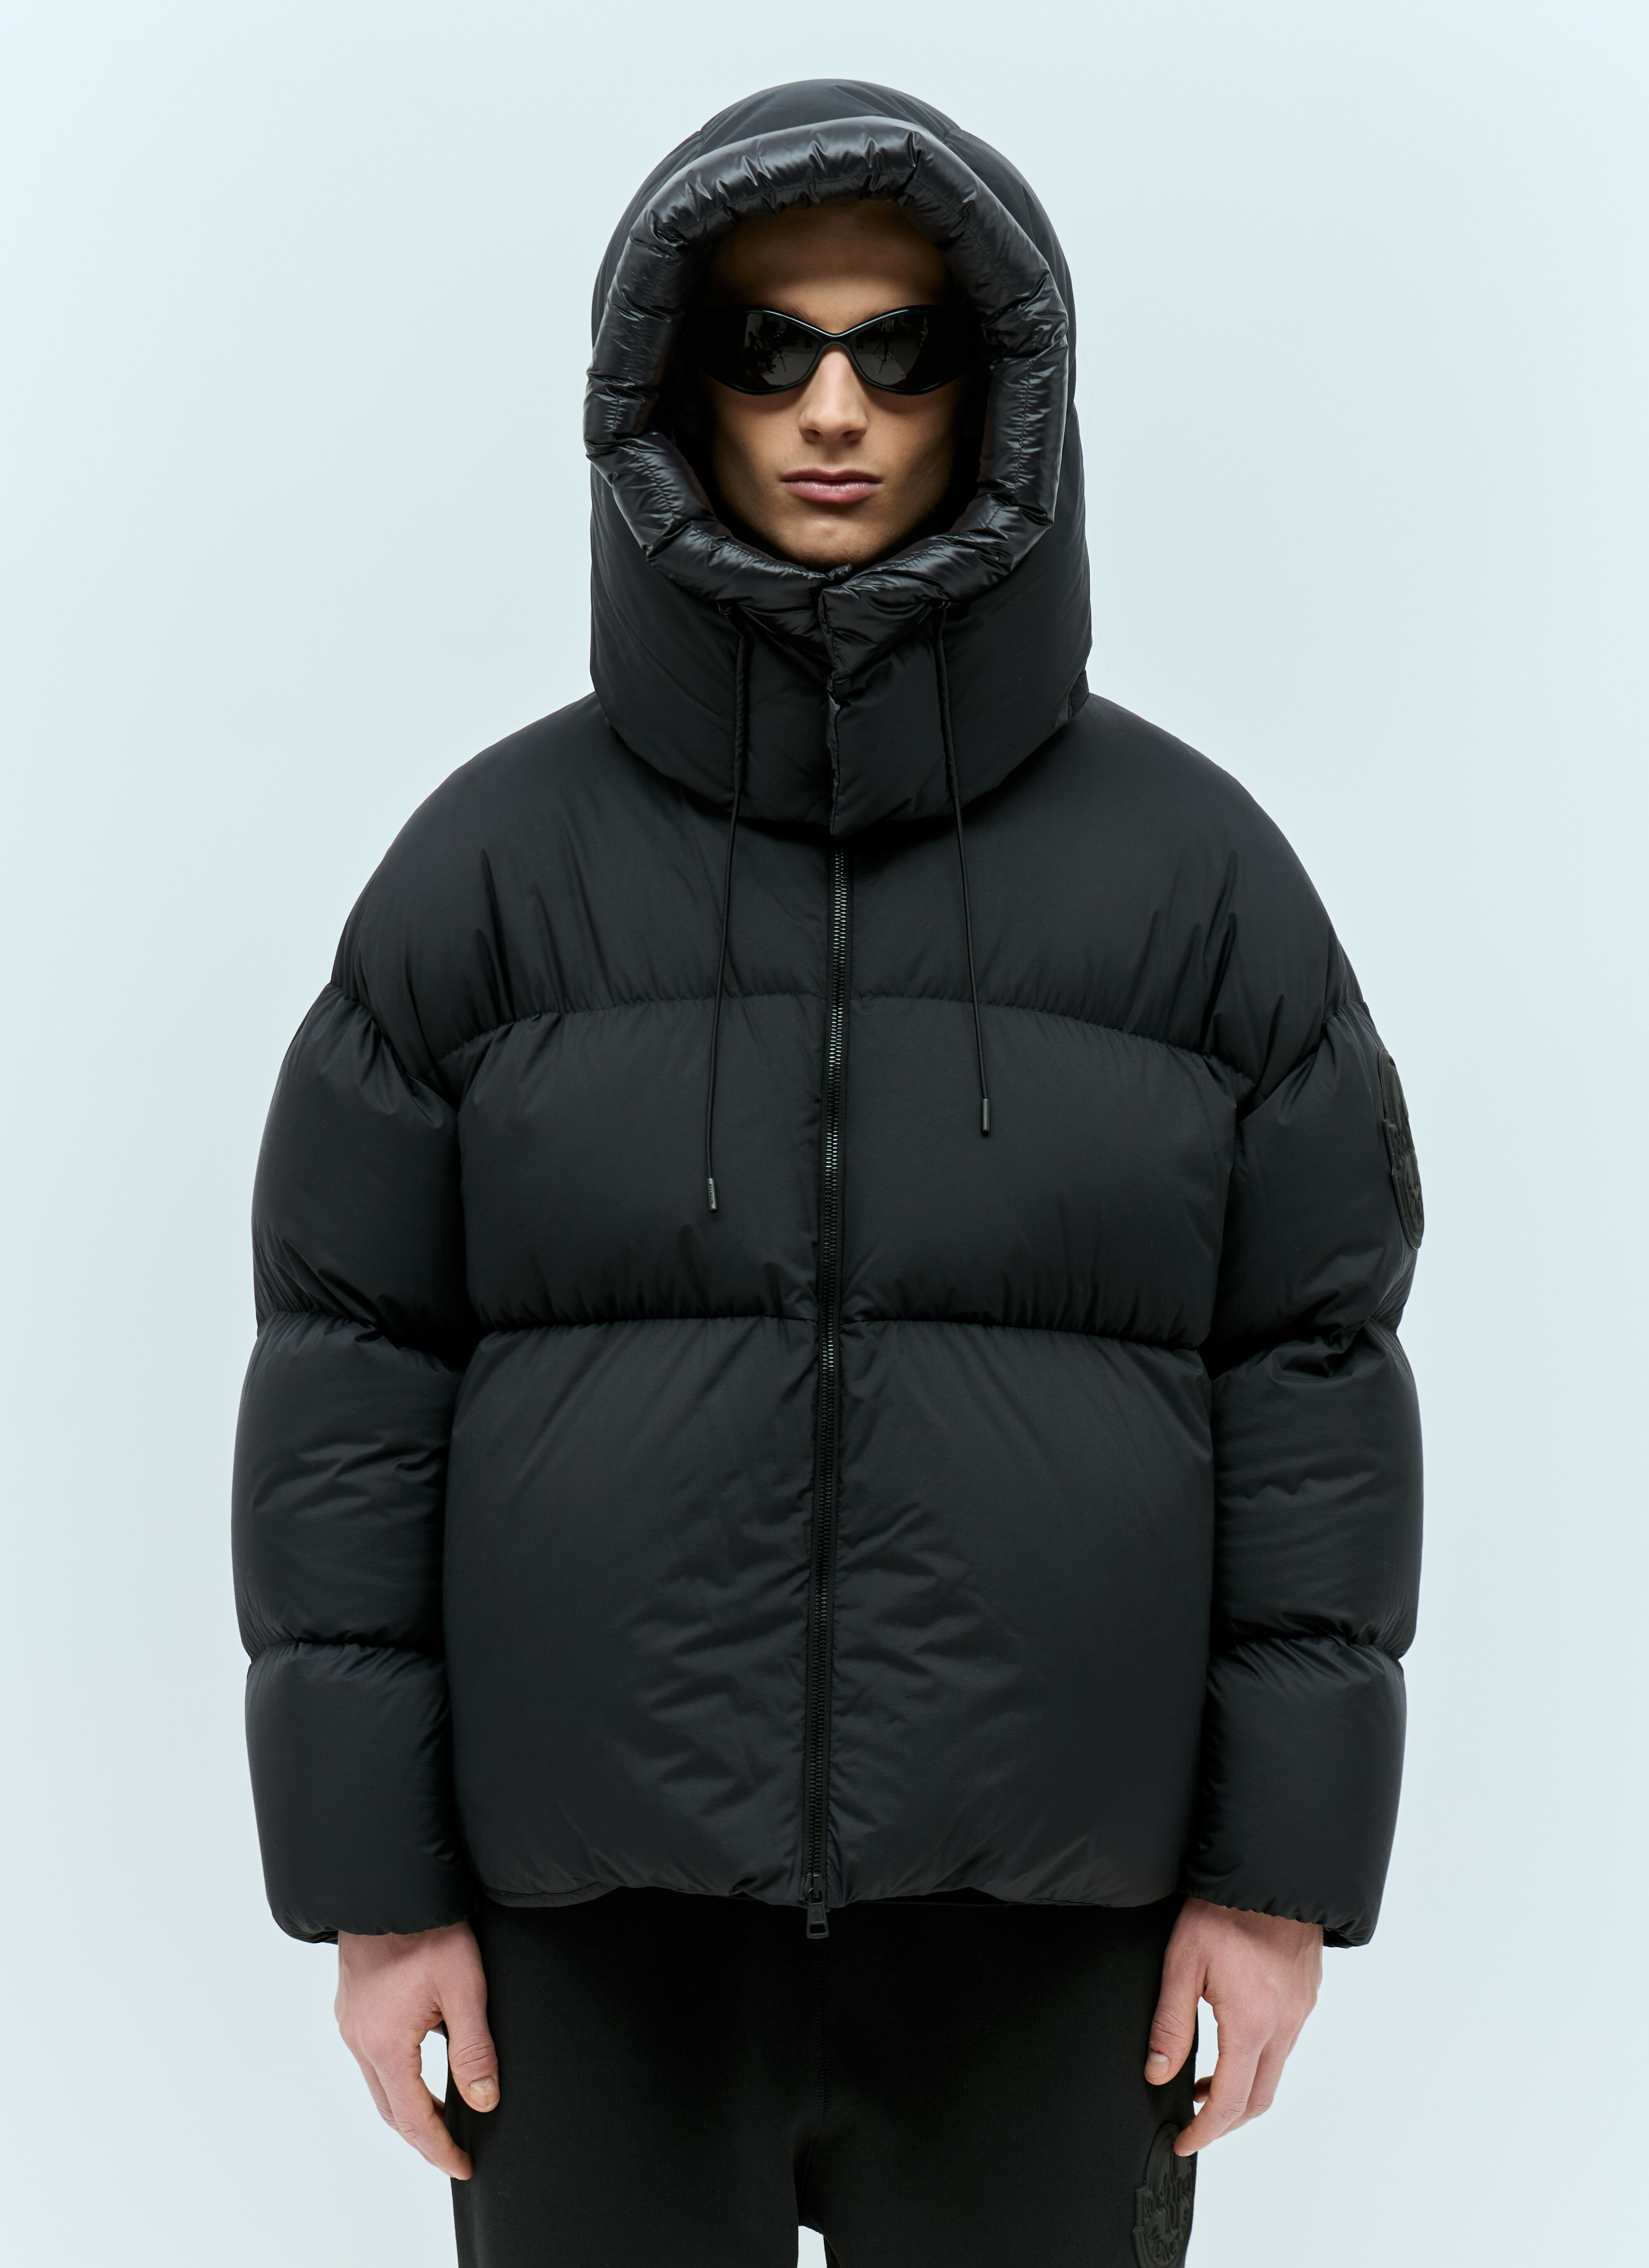 Moncler x Roc Nation designed by Jay-Z Antila パデッドジャケット  クリーム mrn0156001